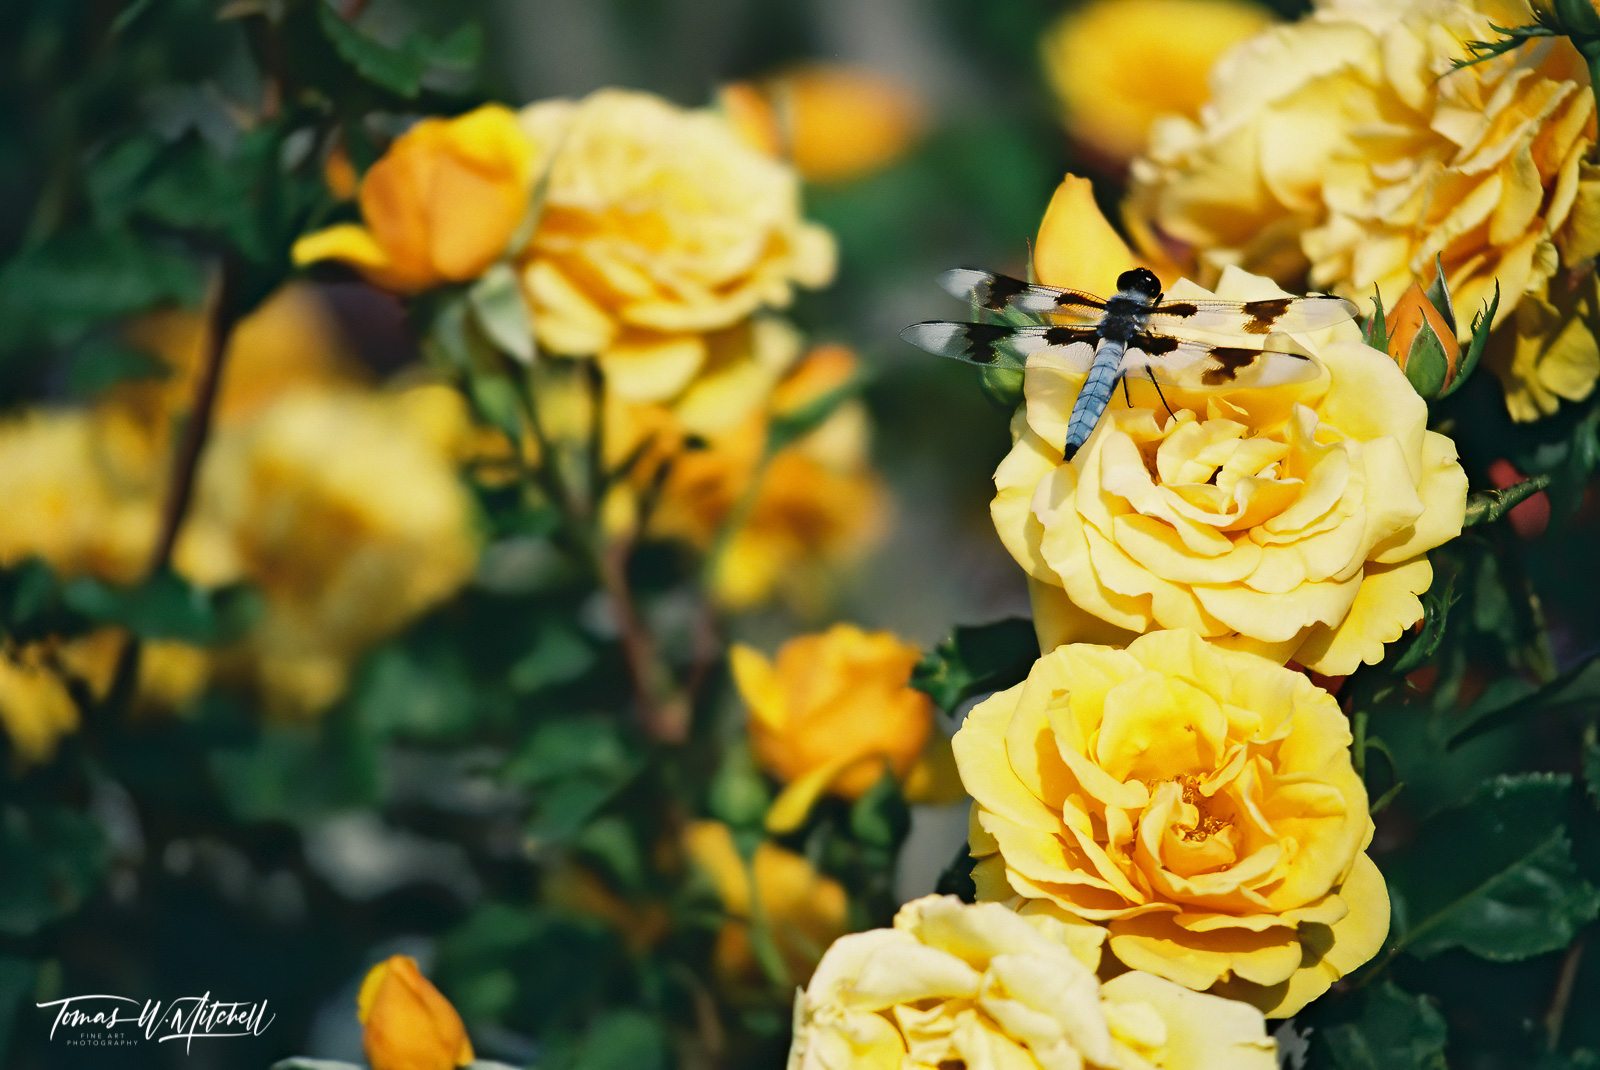 dragonfly on yellow rose